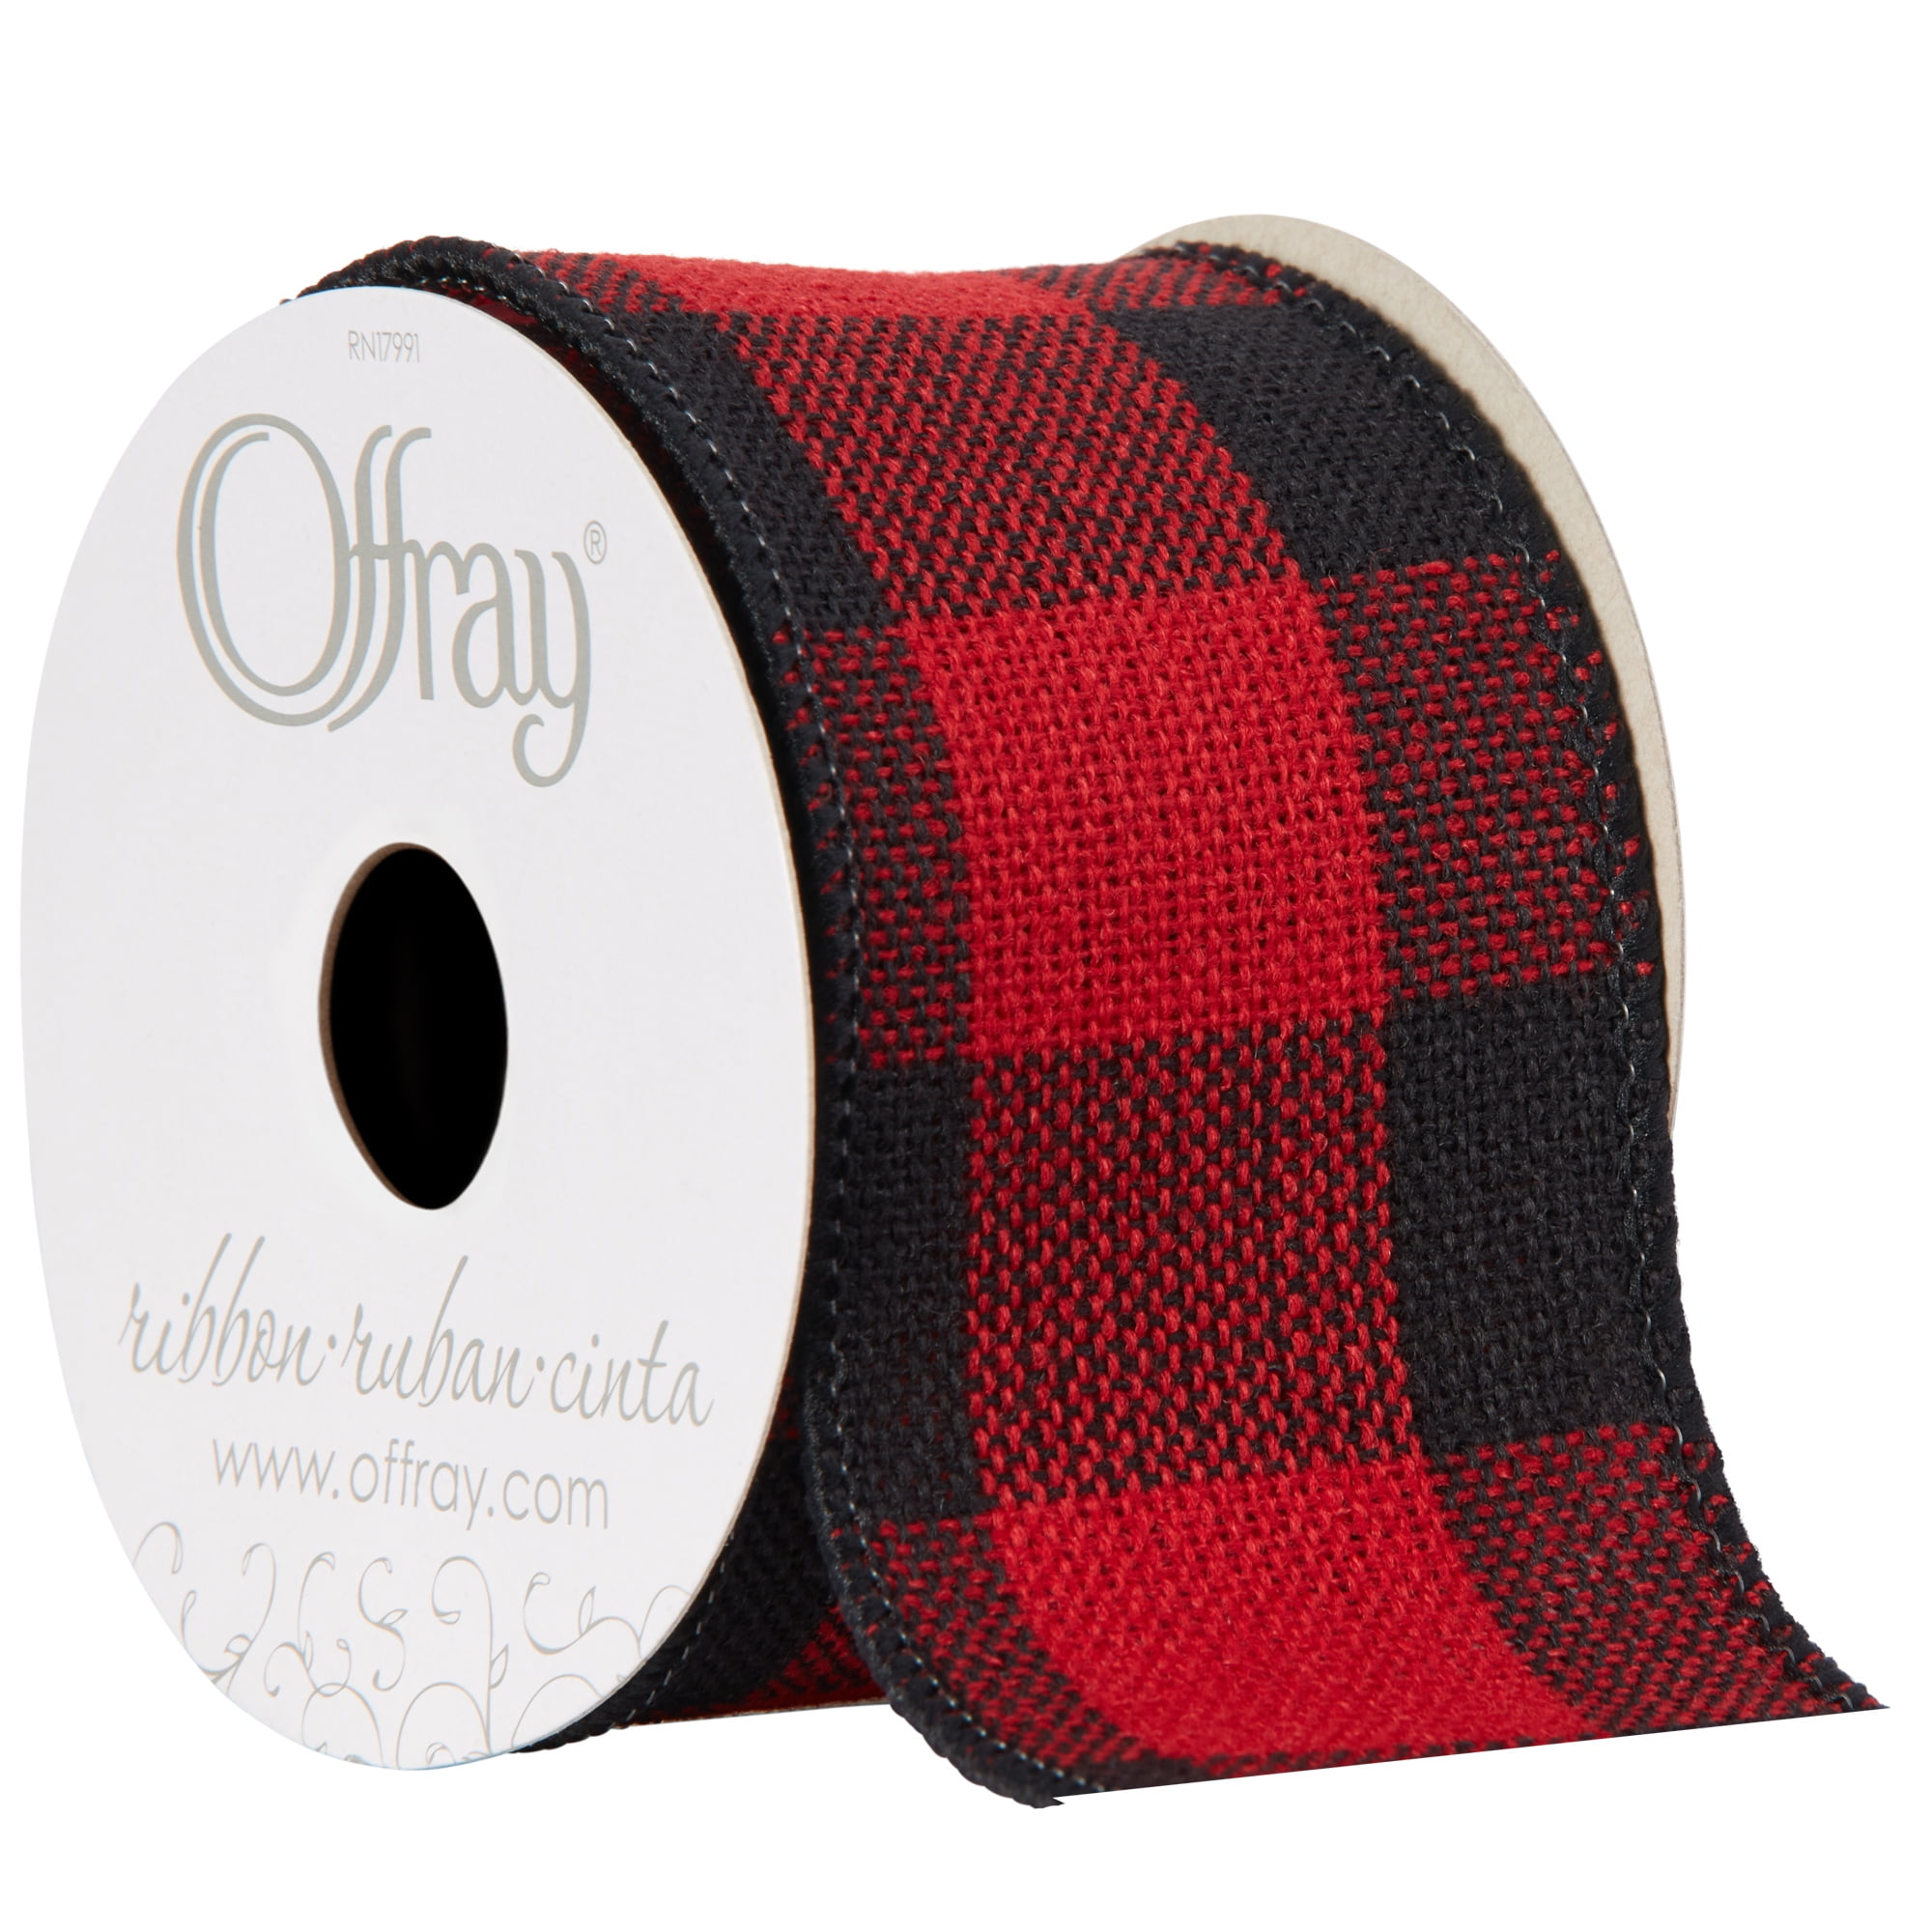 Offray Ribbon, Red and Black Buffalo Check 2 1/2 inch Wired Edge Woven Ribbon, 9 feet